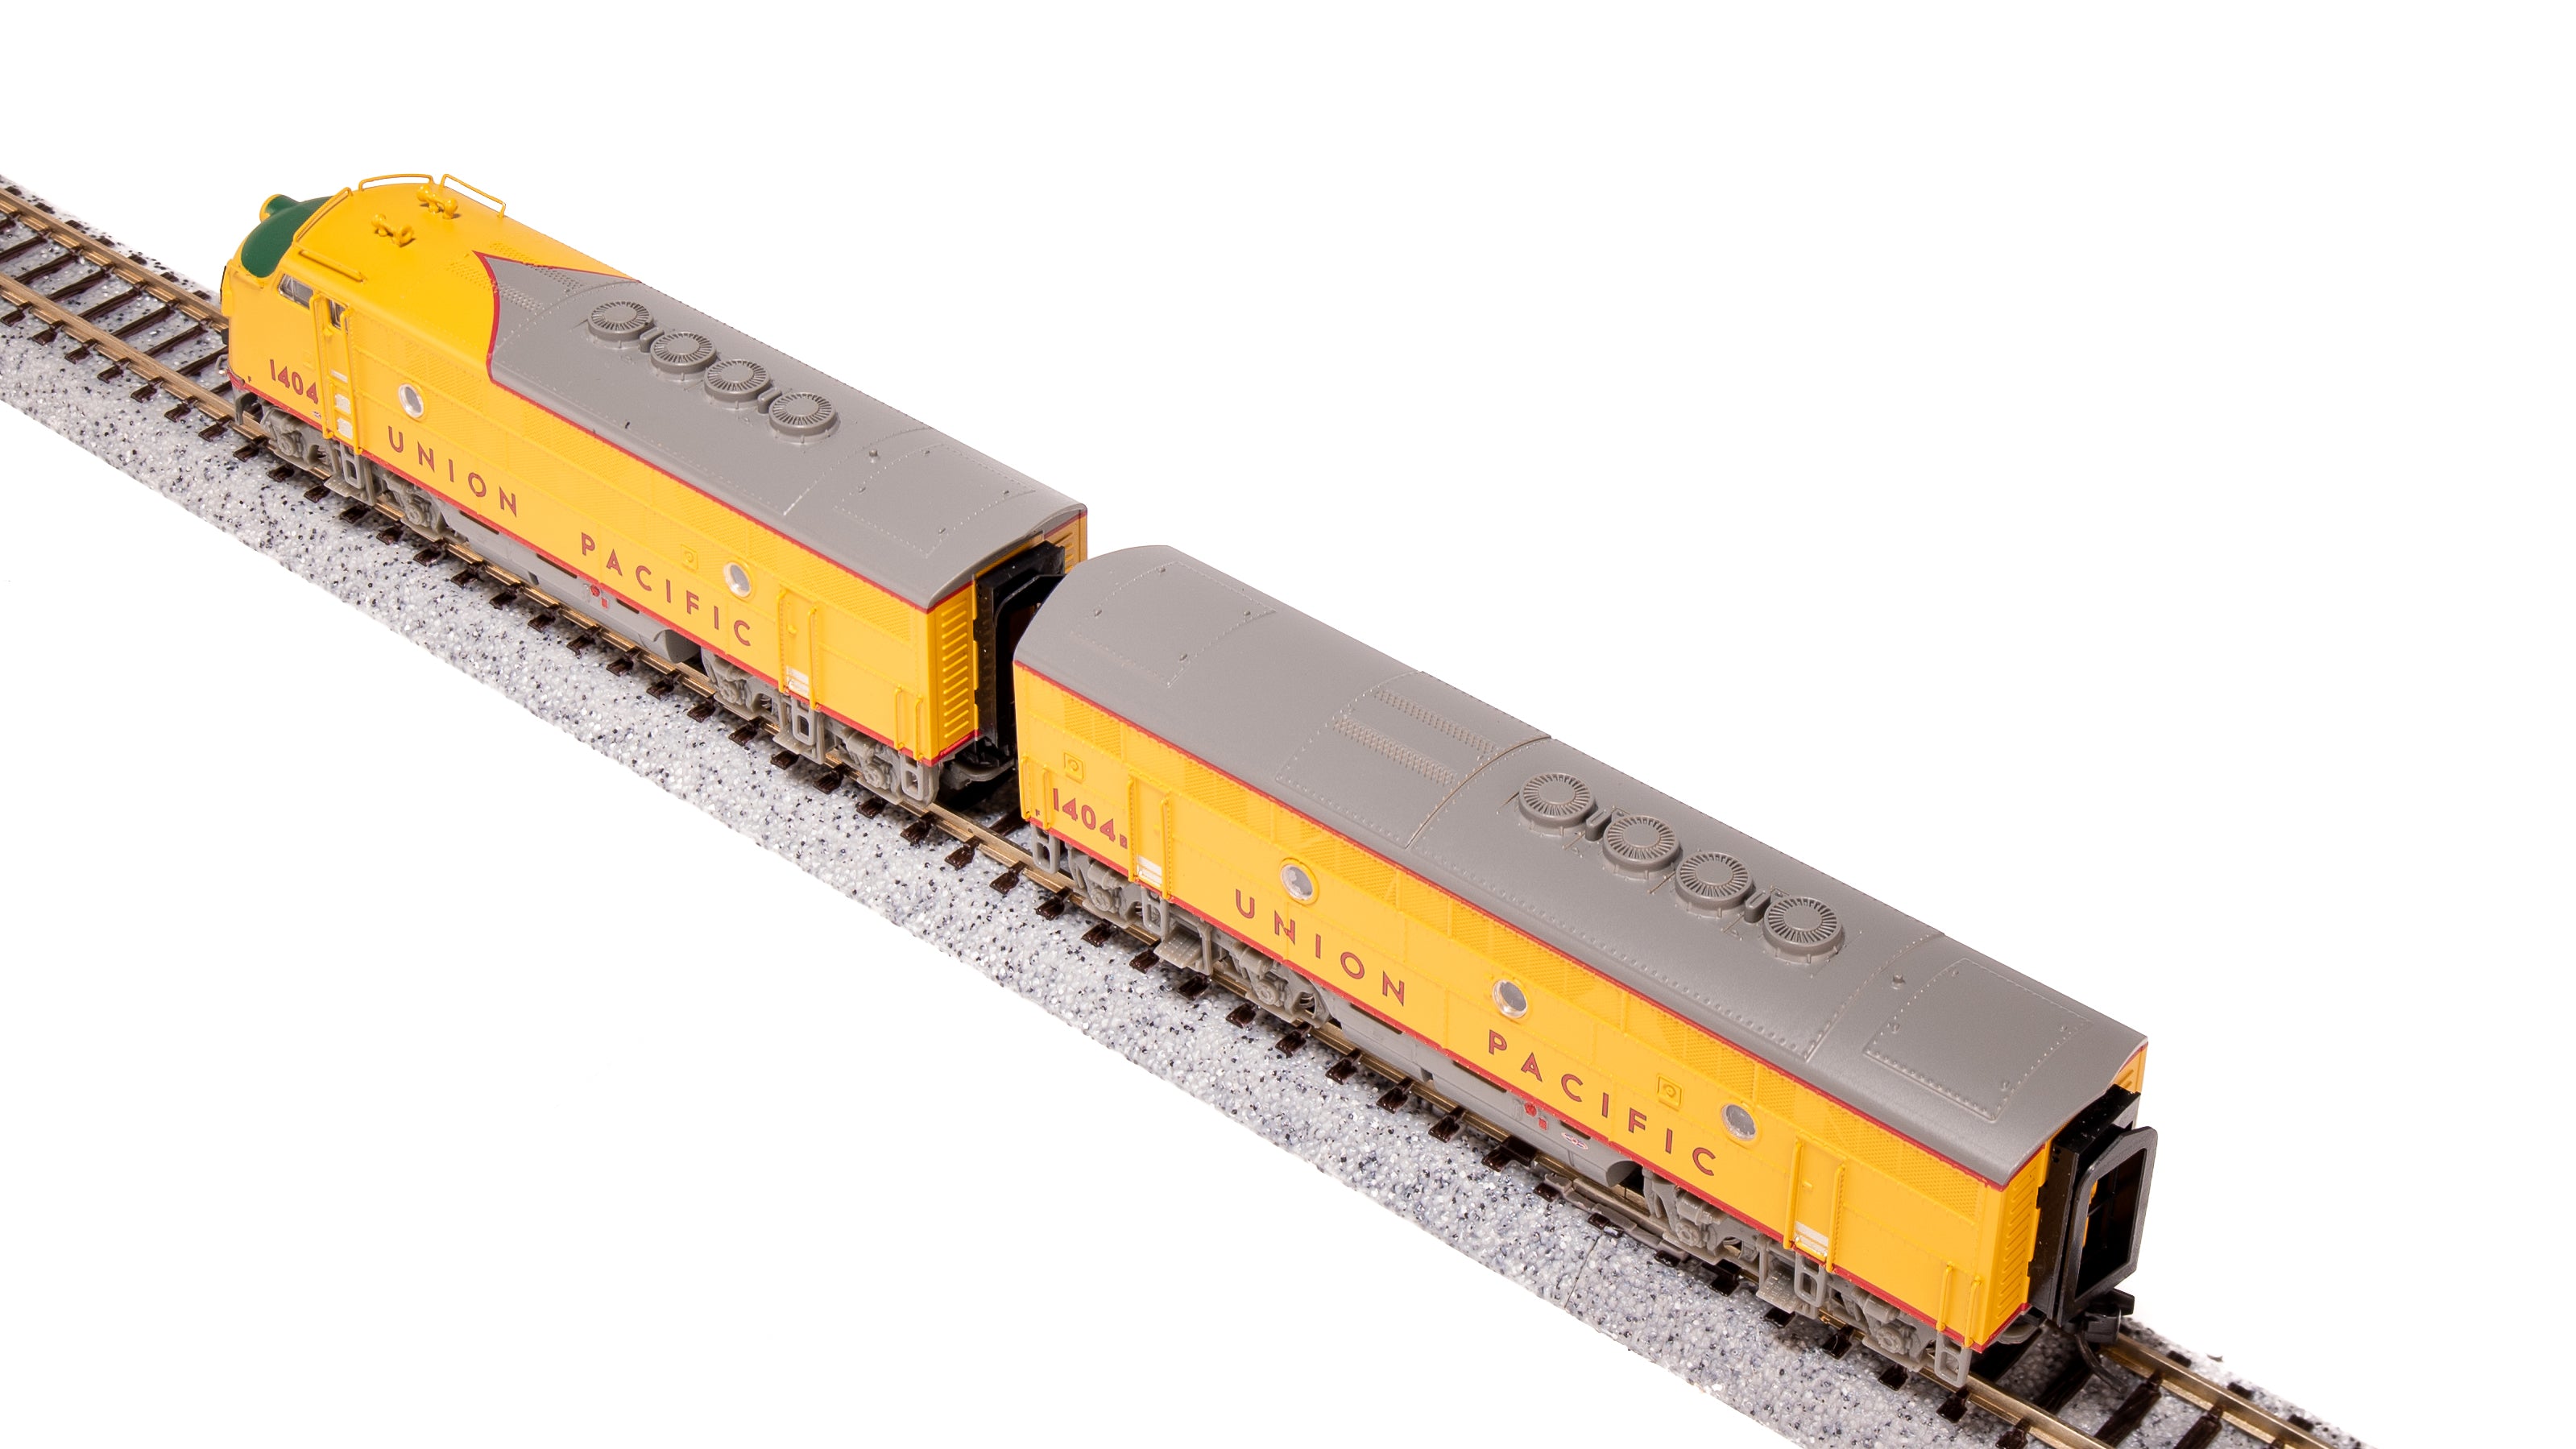 6836 EMD F3 A/B, UP 1404/1404B, Yellow & Gray As-Delivered, A-unit Paragon4 Sound/DC/DCC, Unpowered B-unit, N Default Title